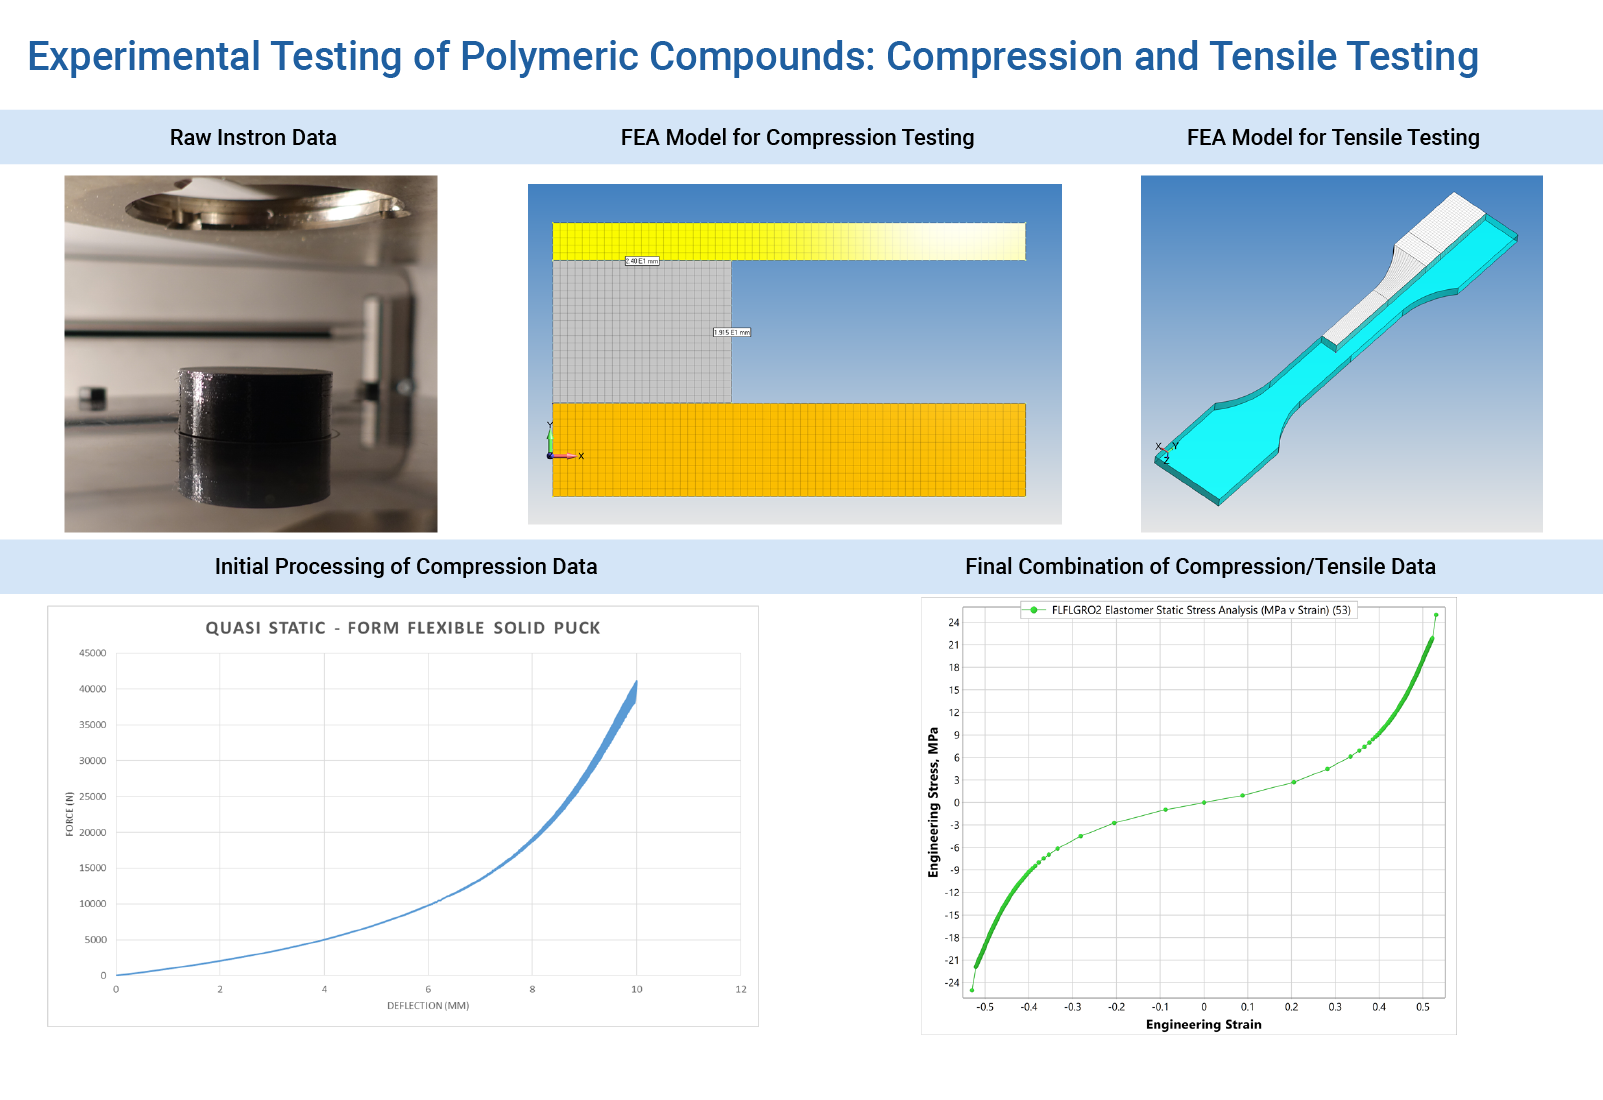 Development of Elastomeric Additive Manufacturing Materials from Mechanical Tests to FEA Verification - FEA Nonlinear Consulting Services